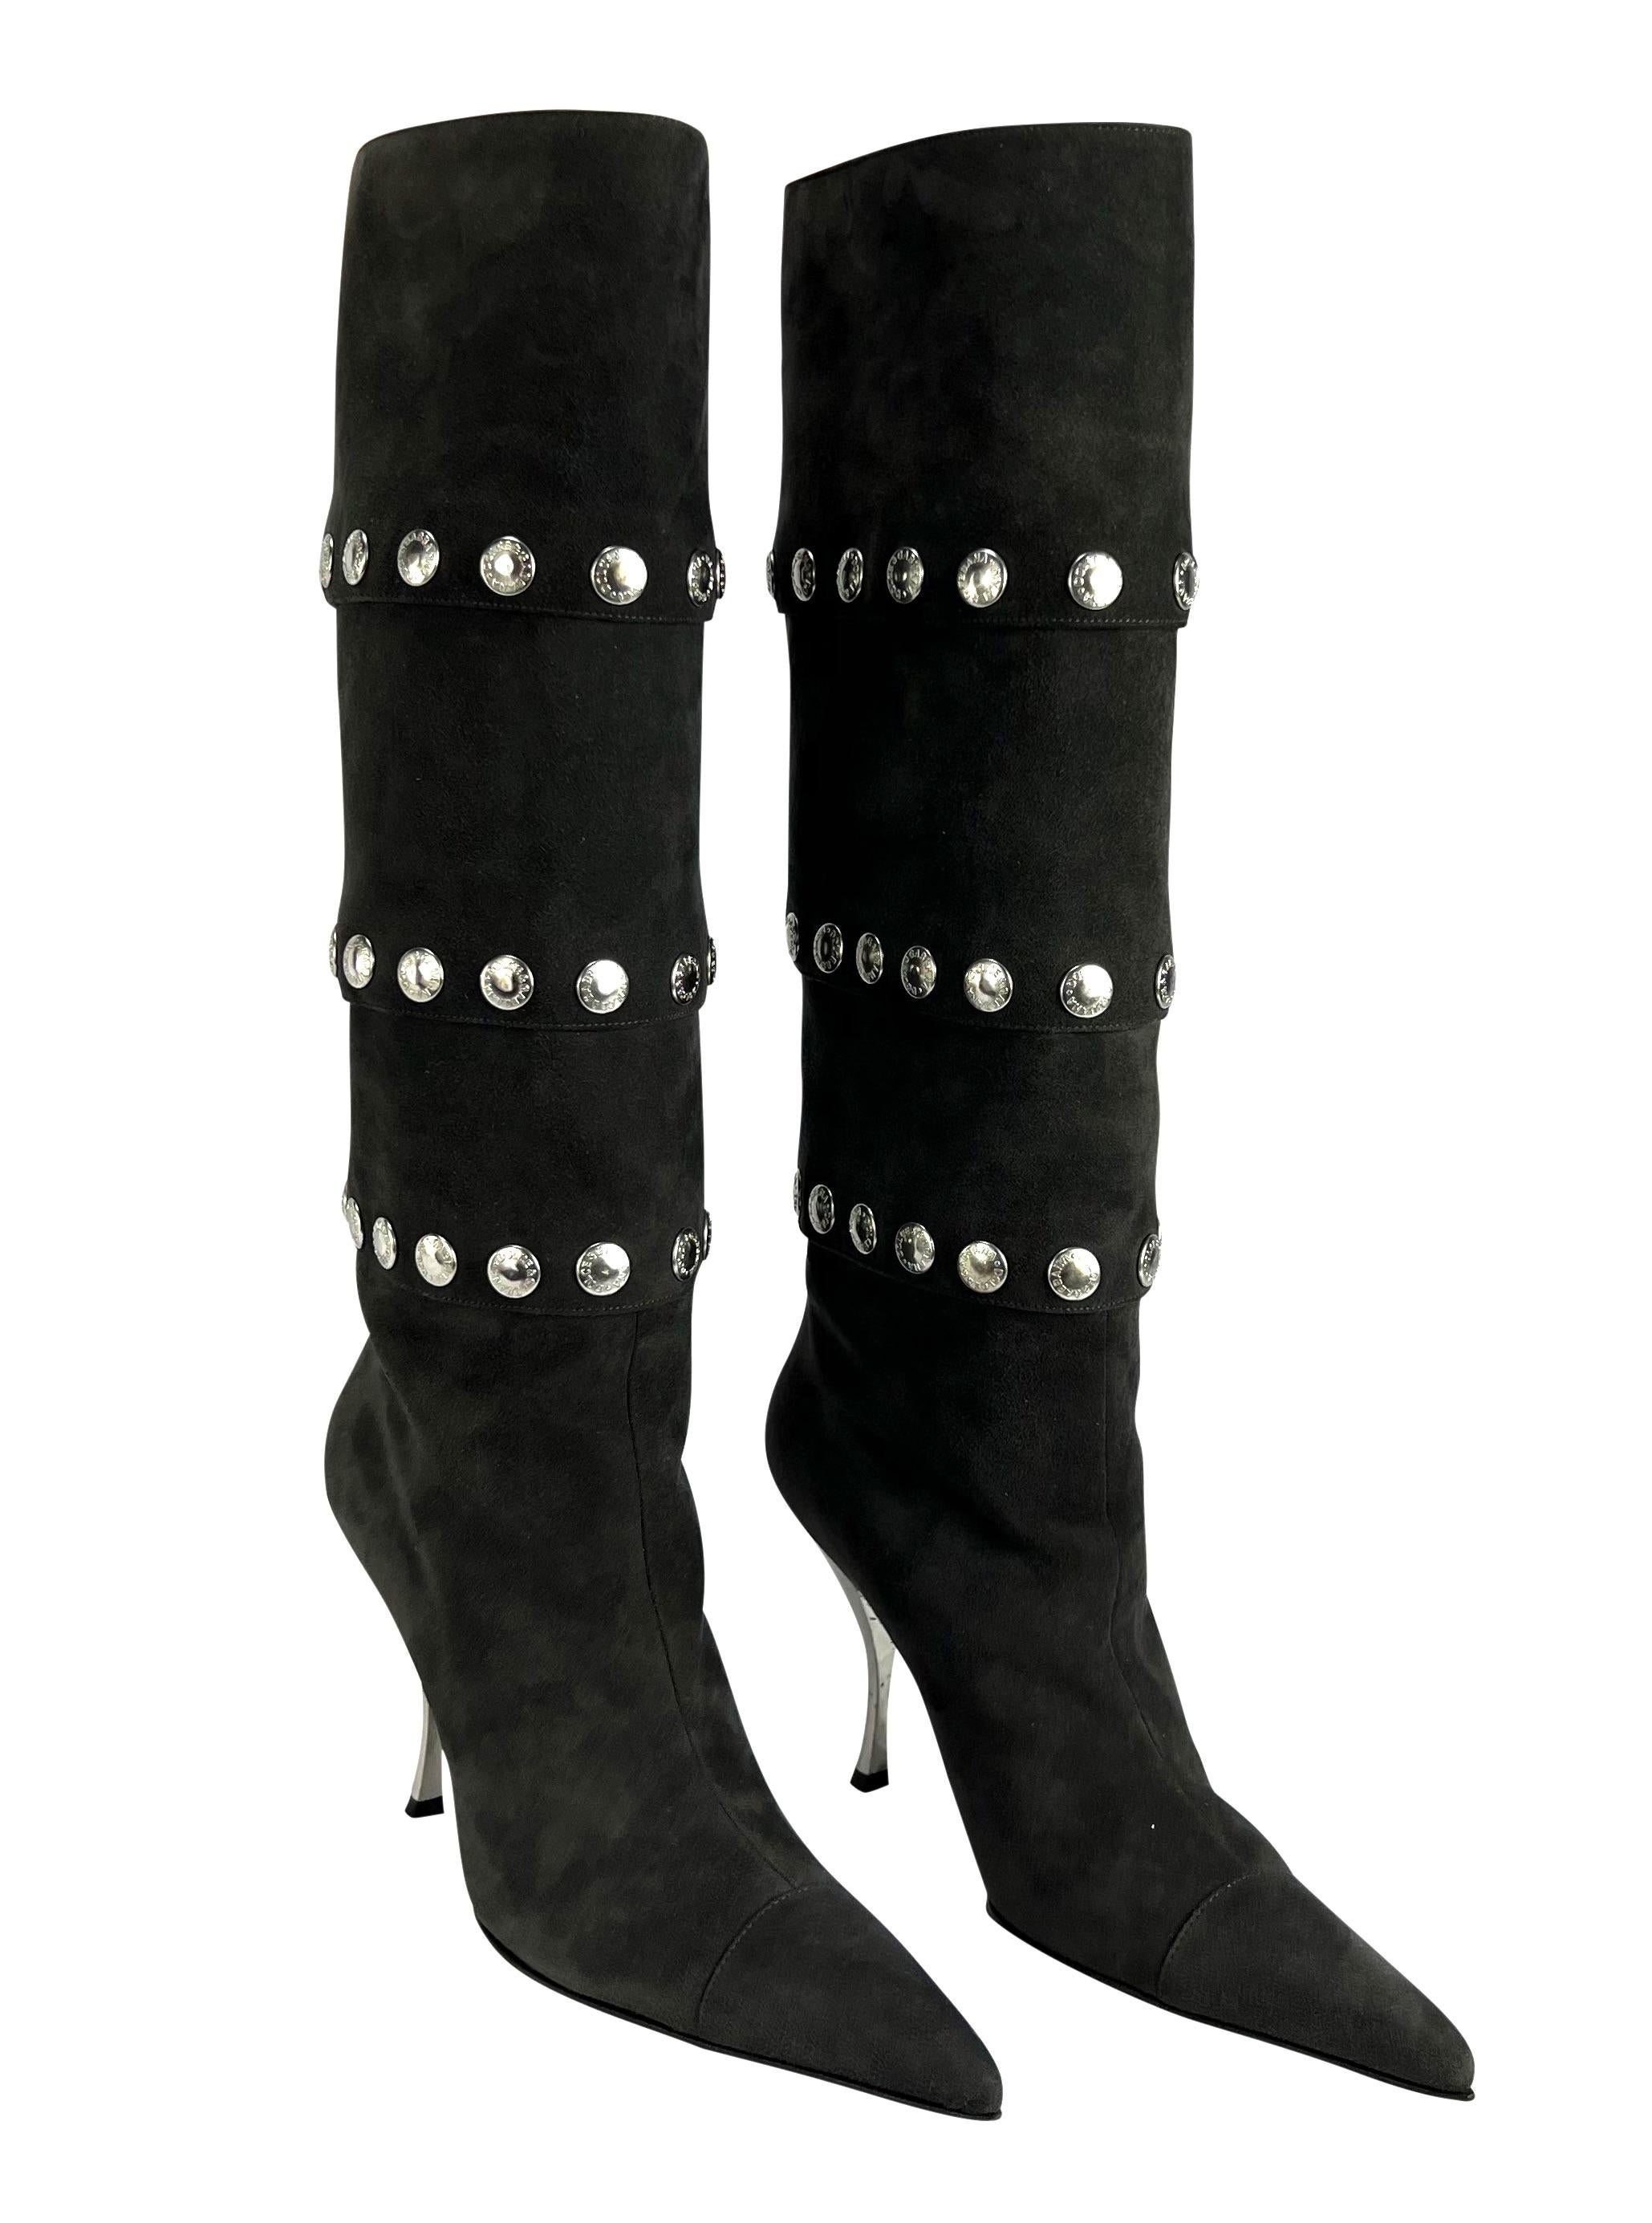 Presenting a fabulous pair of pointed dark grey suede Dolce and Gabbana boots. From the Fall/Winter 2003, these versatile boots are covered in silver-tone snaps which were heavily used on the season's runway. The snaps on these heeled boots allow